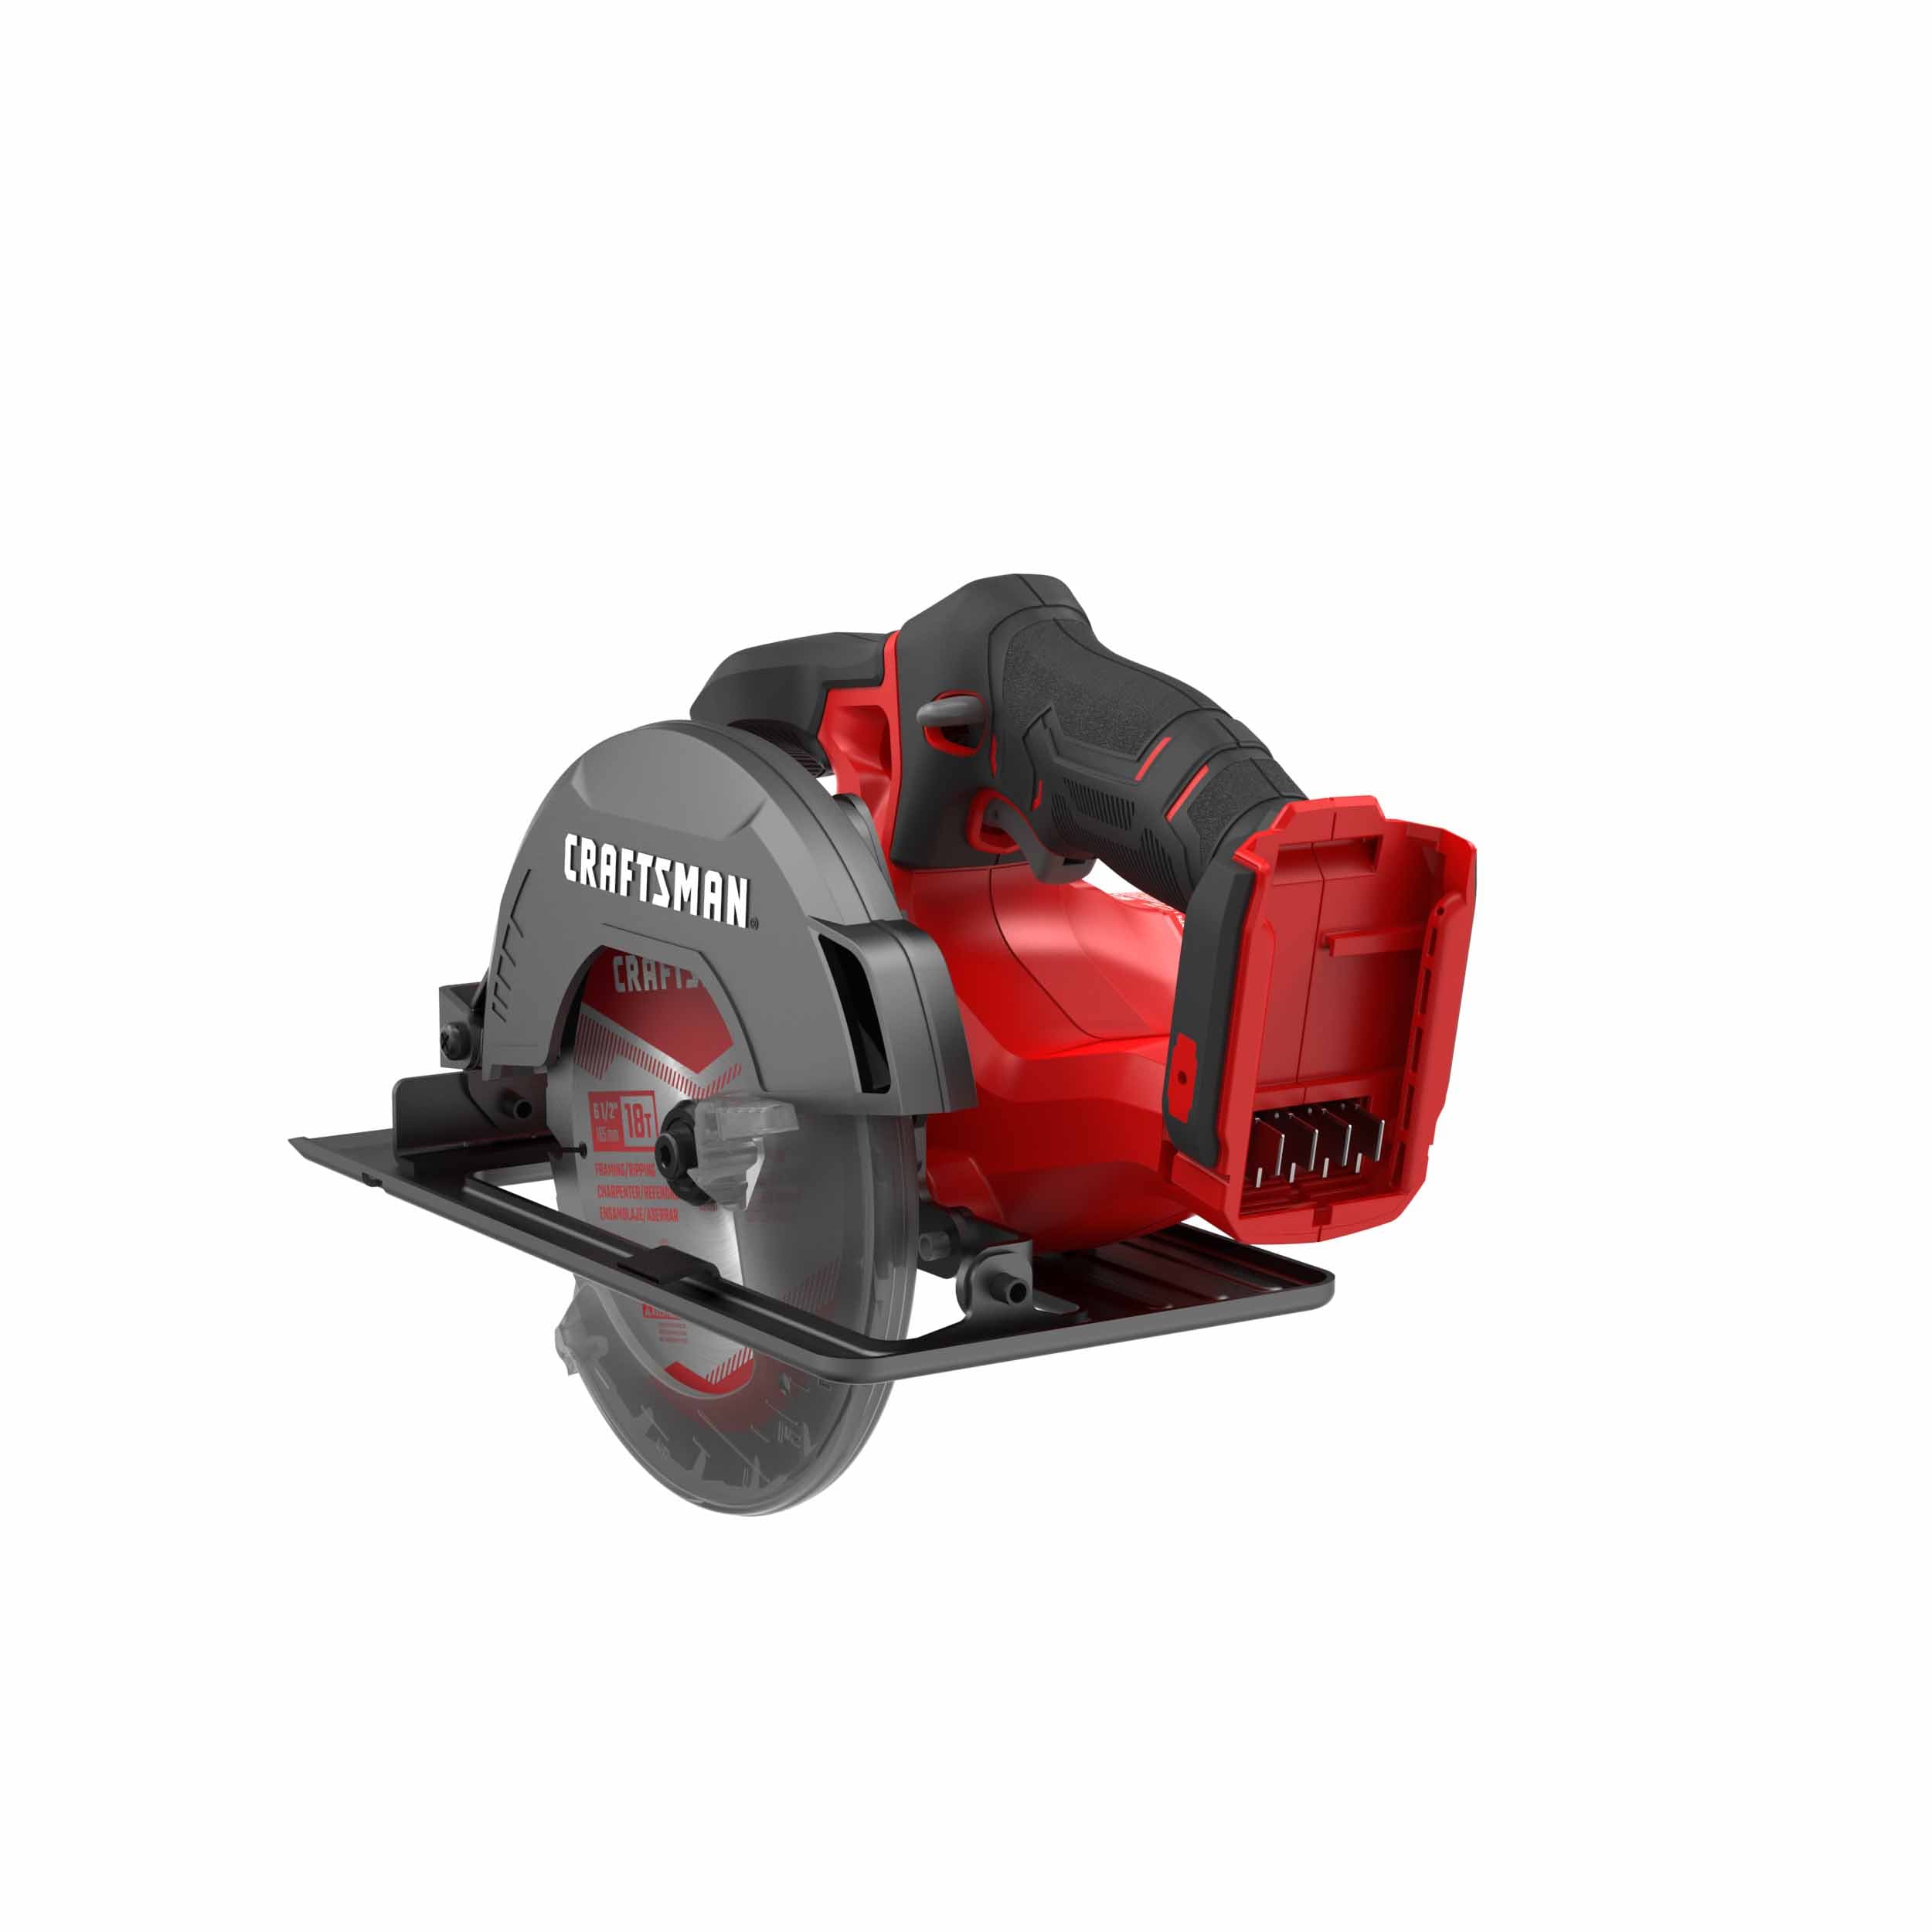 Image of CMES610 12-Inch Miter Saw at lowes.com